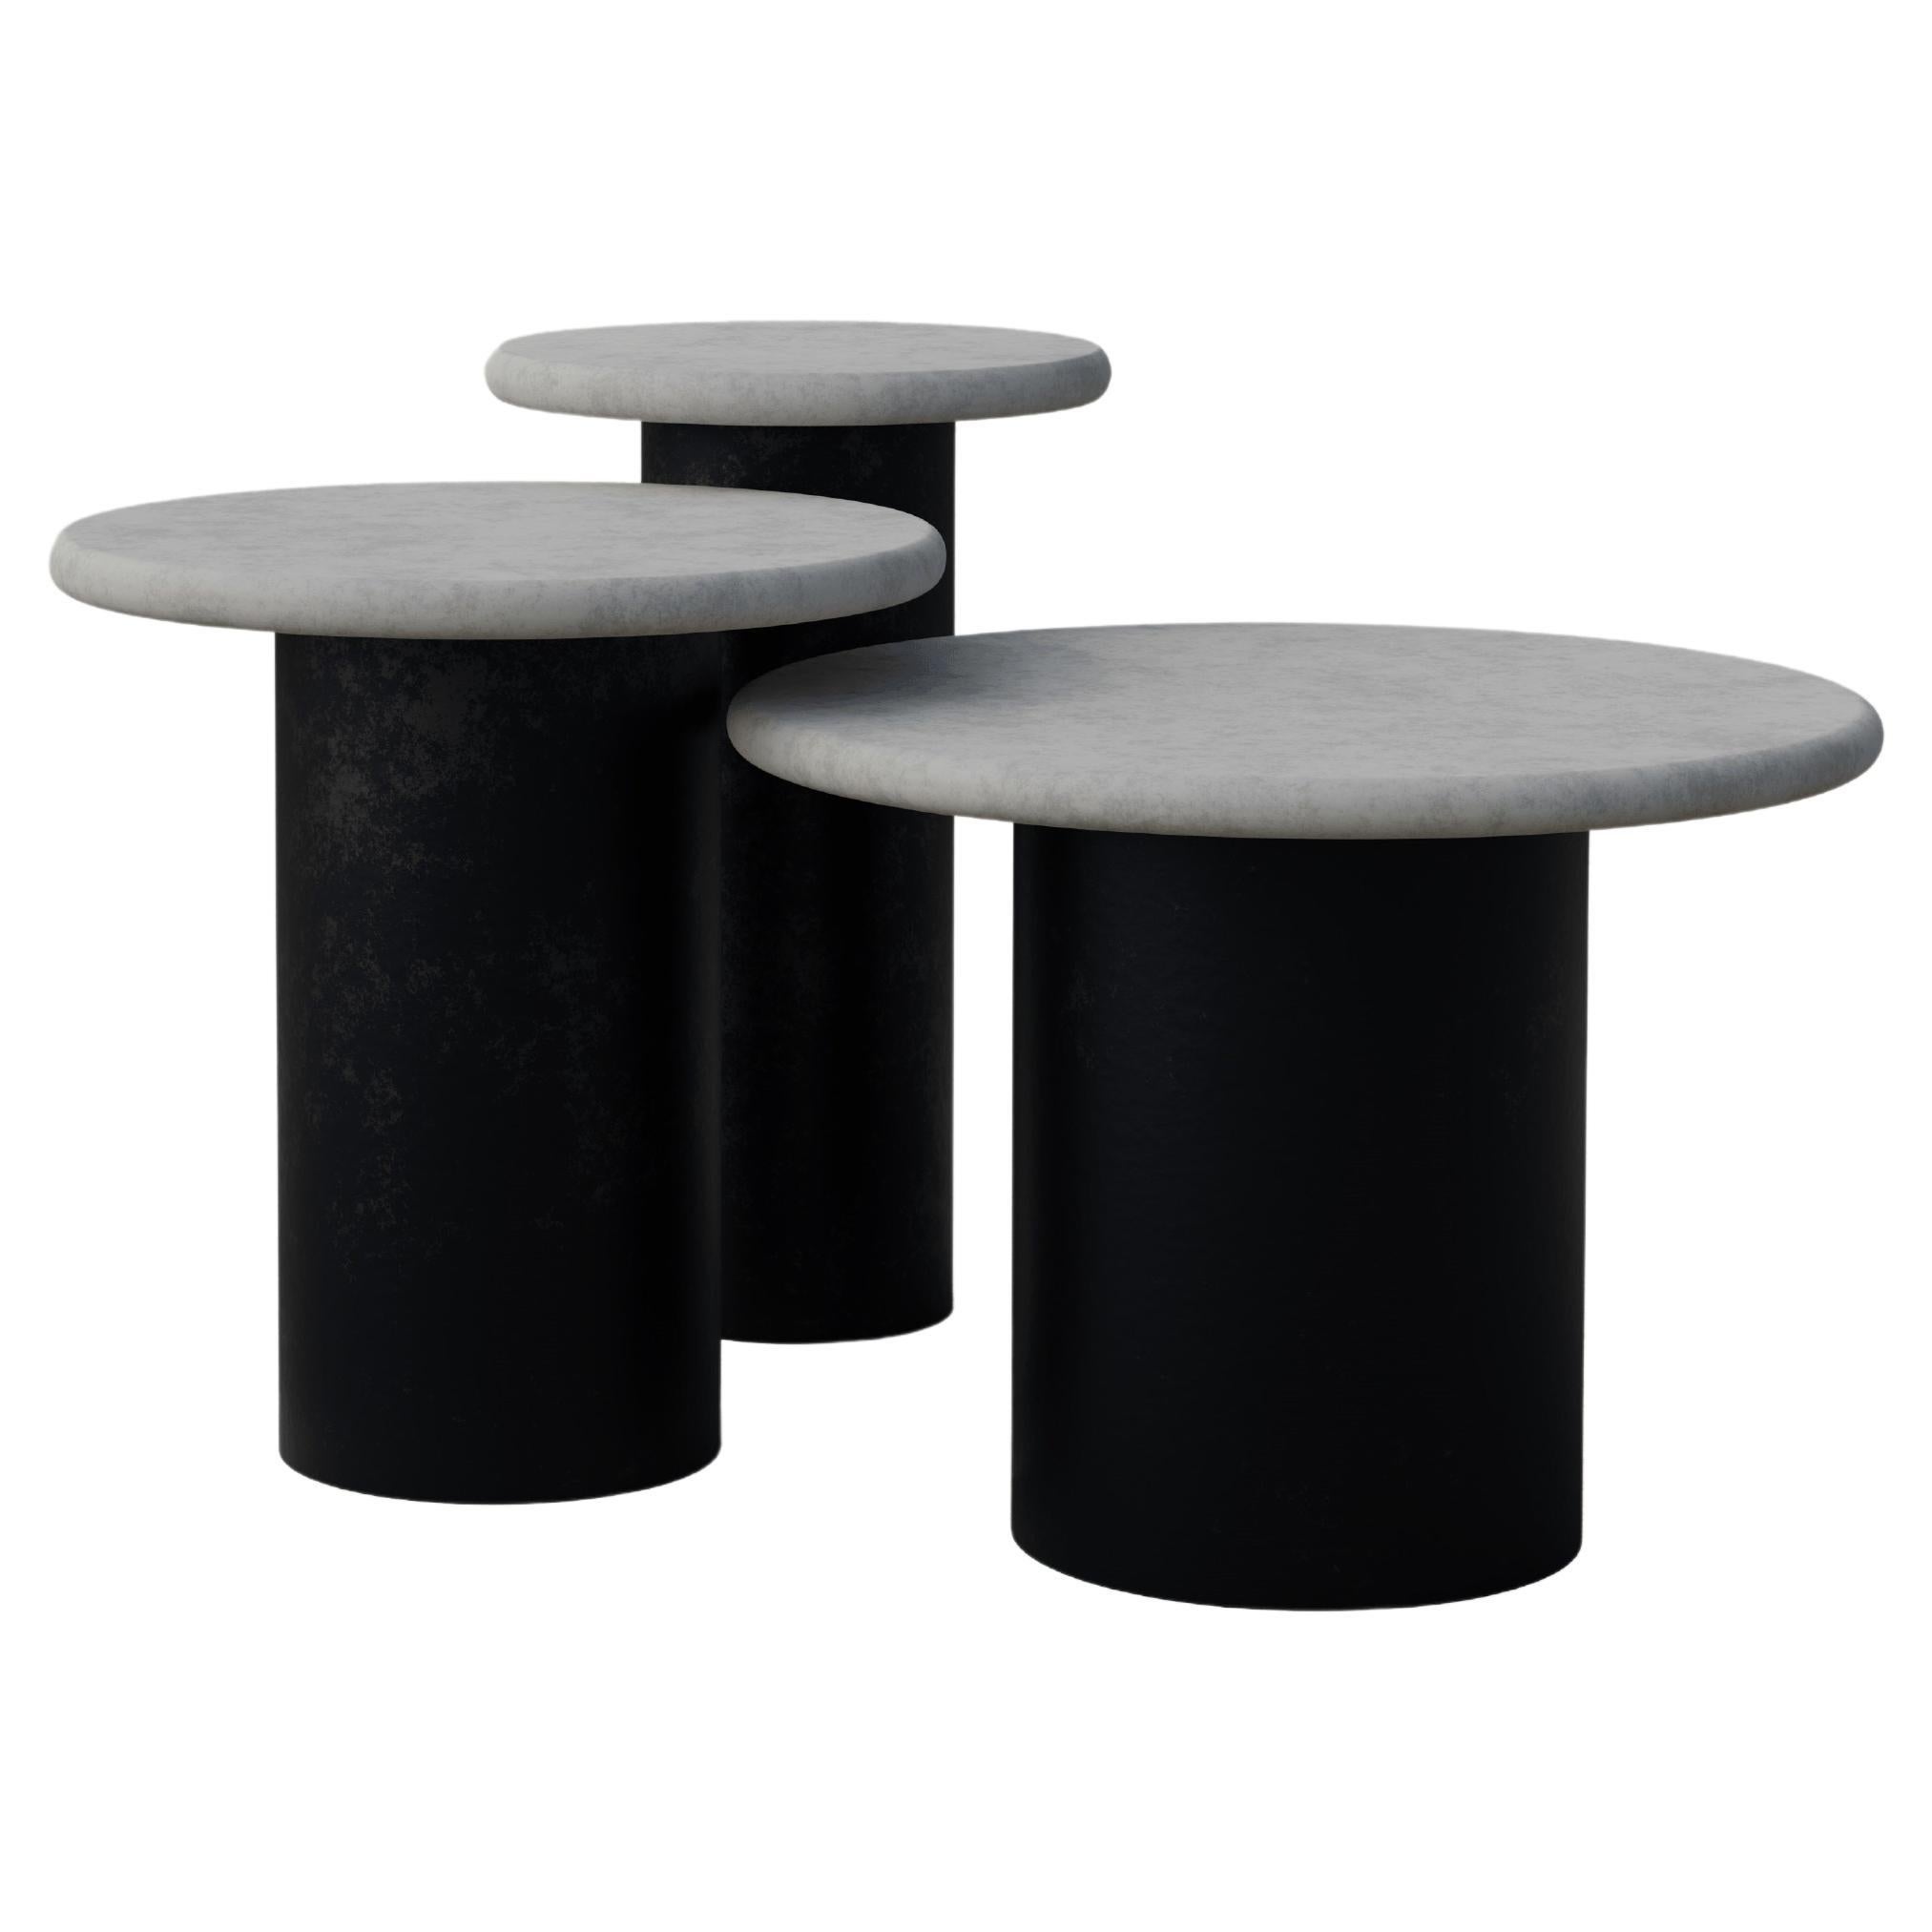 Raindrop Side Table Set, 300, 400, 500, Microcrete / Patinated For Sale